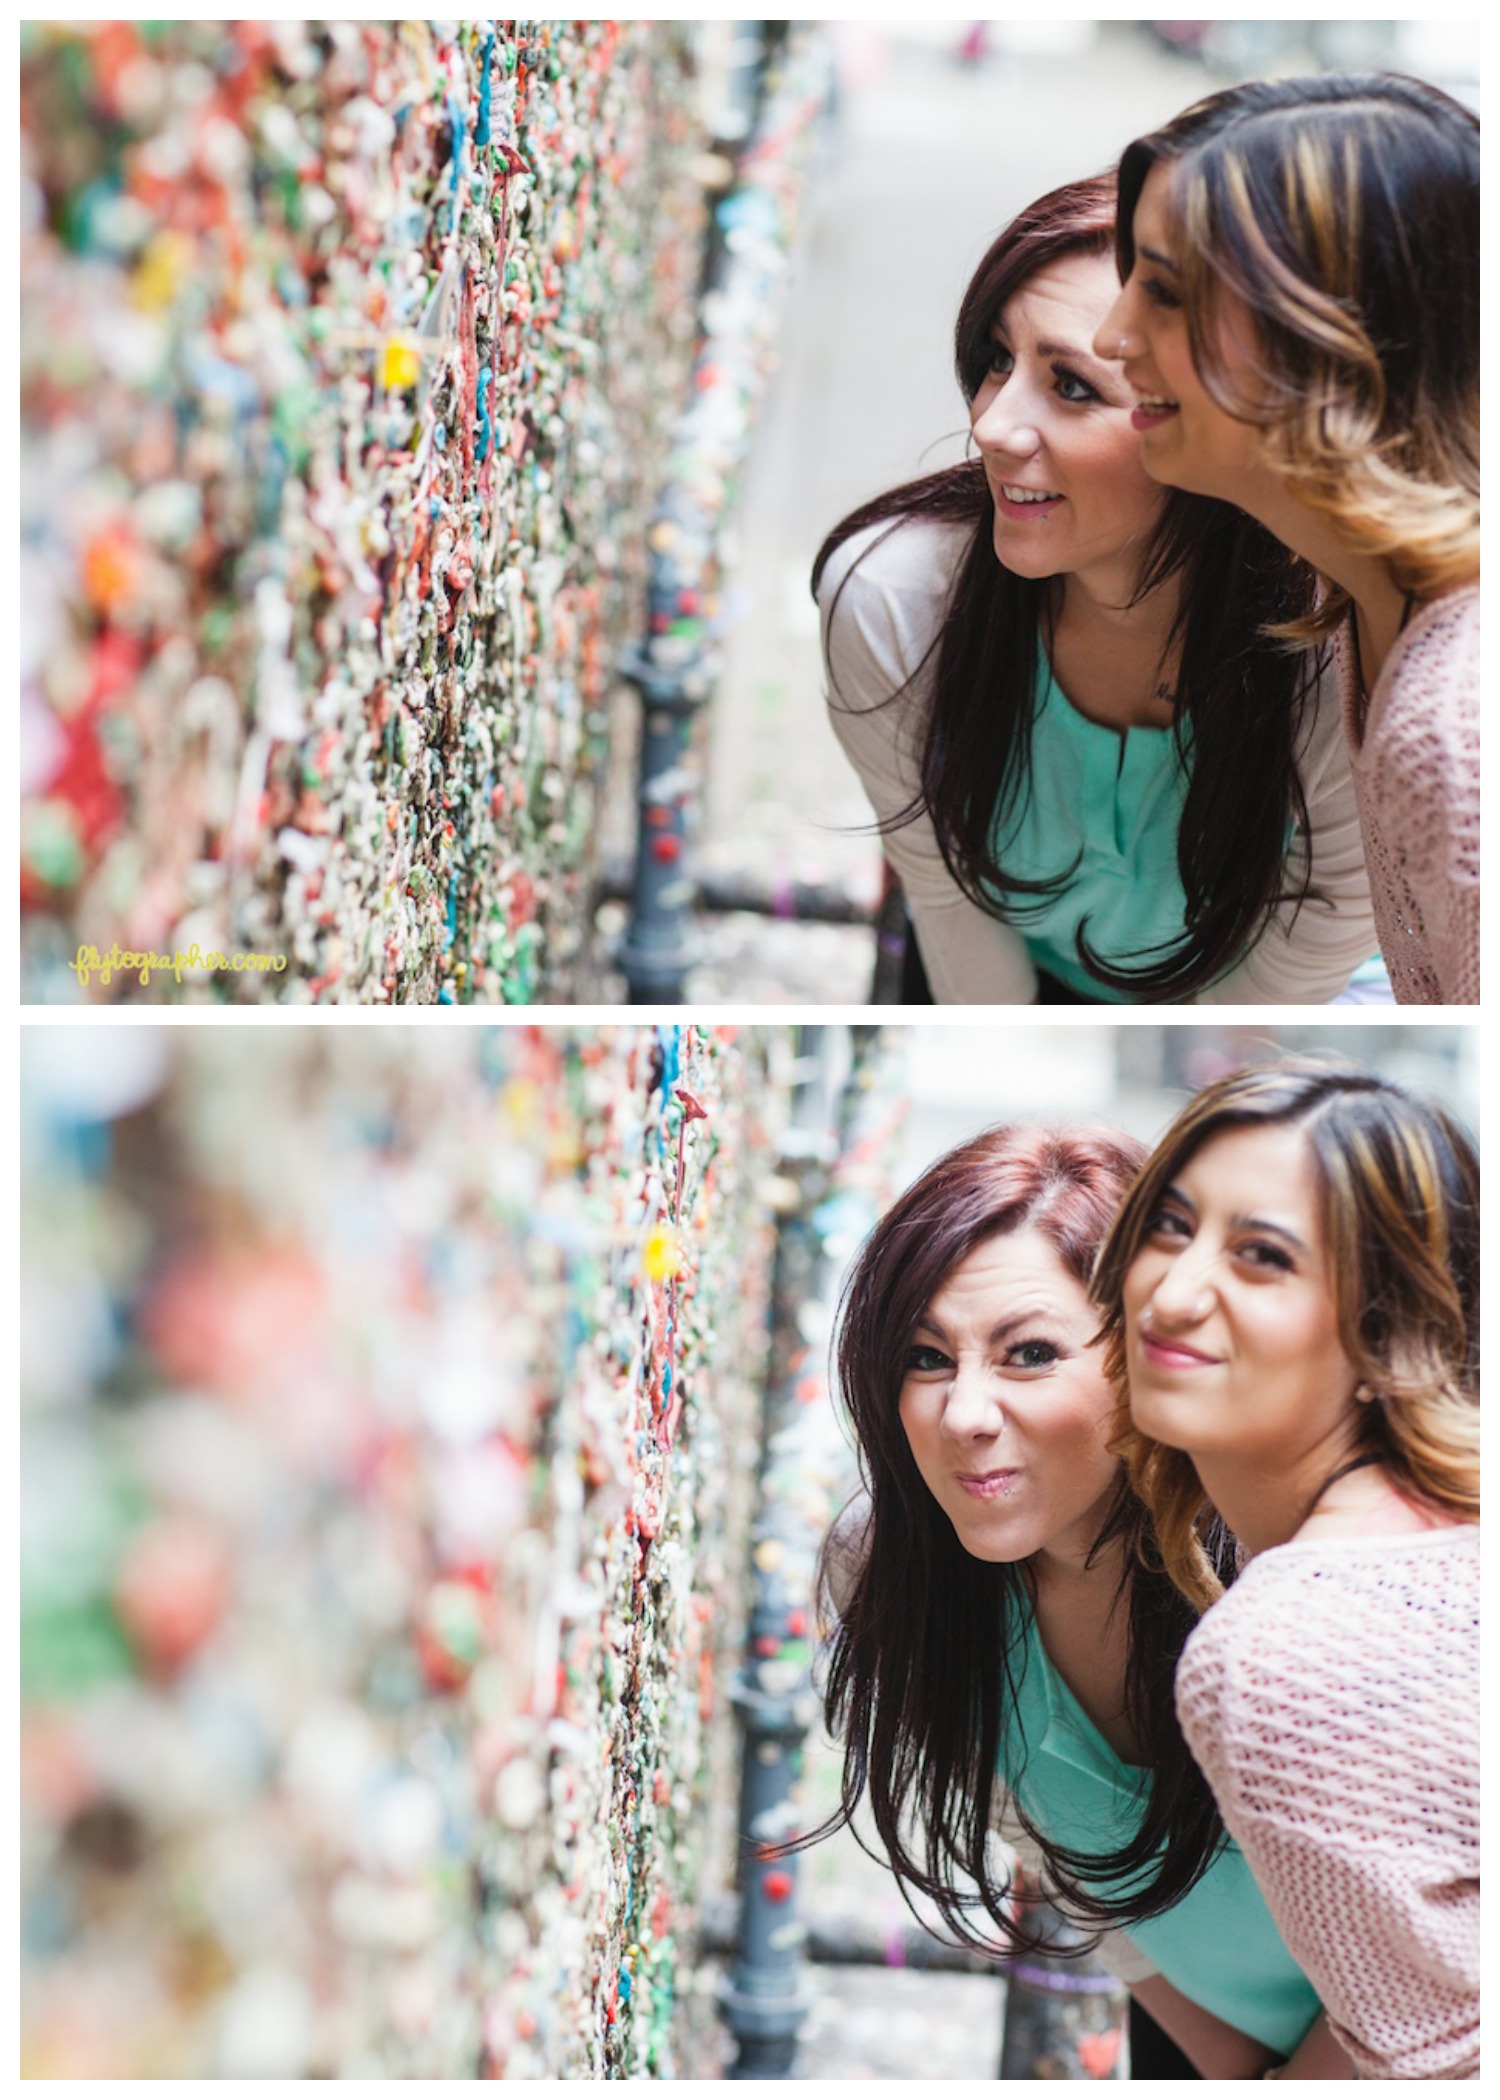  The Gum Wall in Pike Place Market. Verdict? Not so appetizing... 